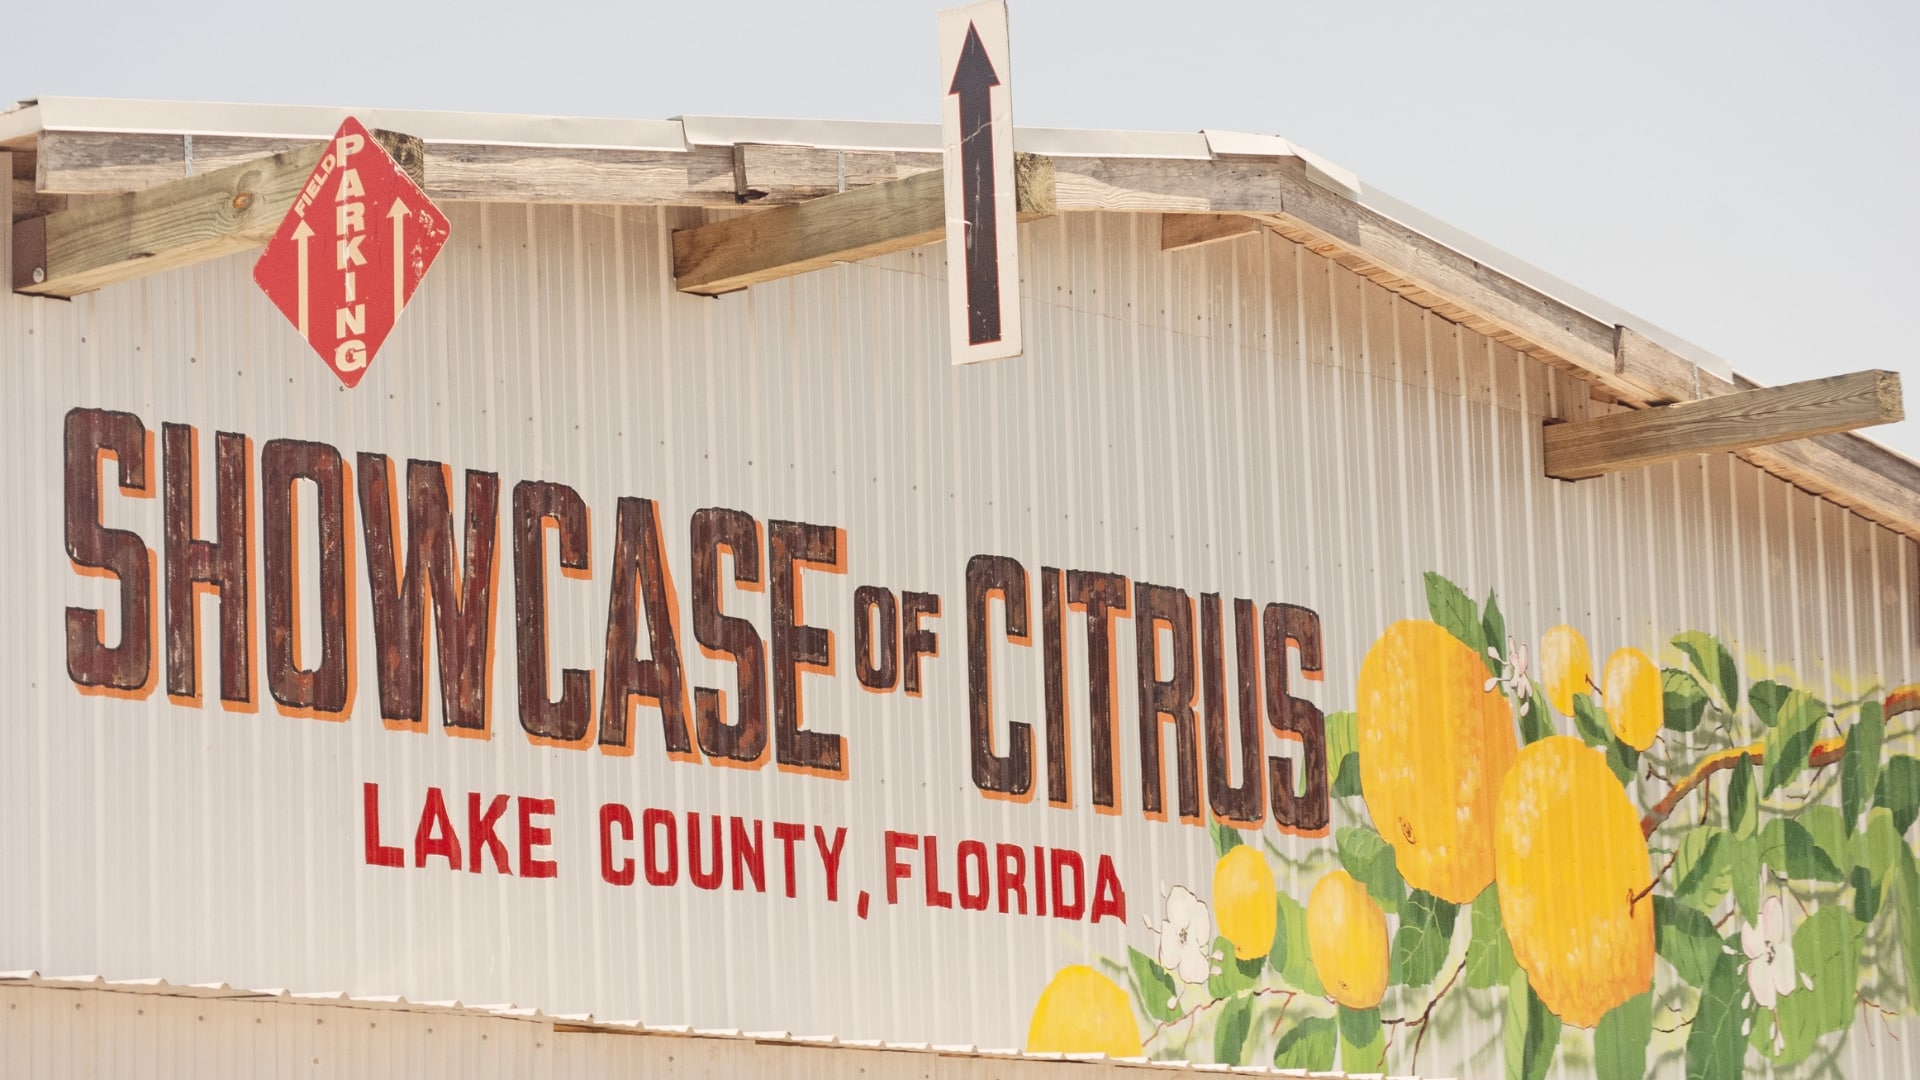 The Showcase of Citrus - Lake County Memorial Day